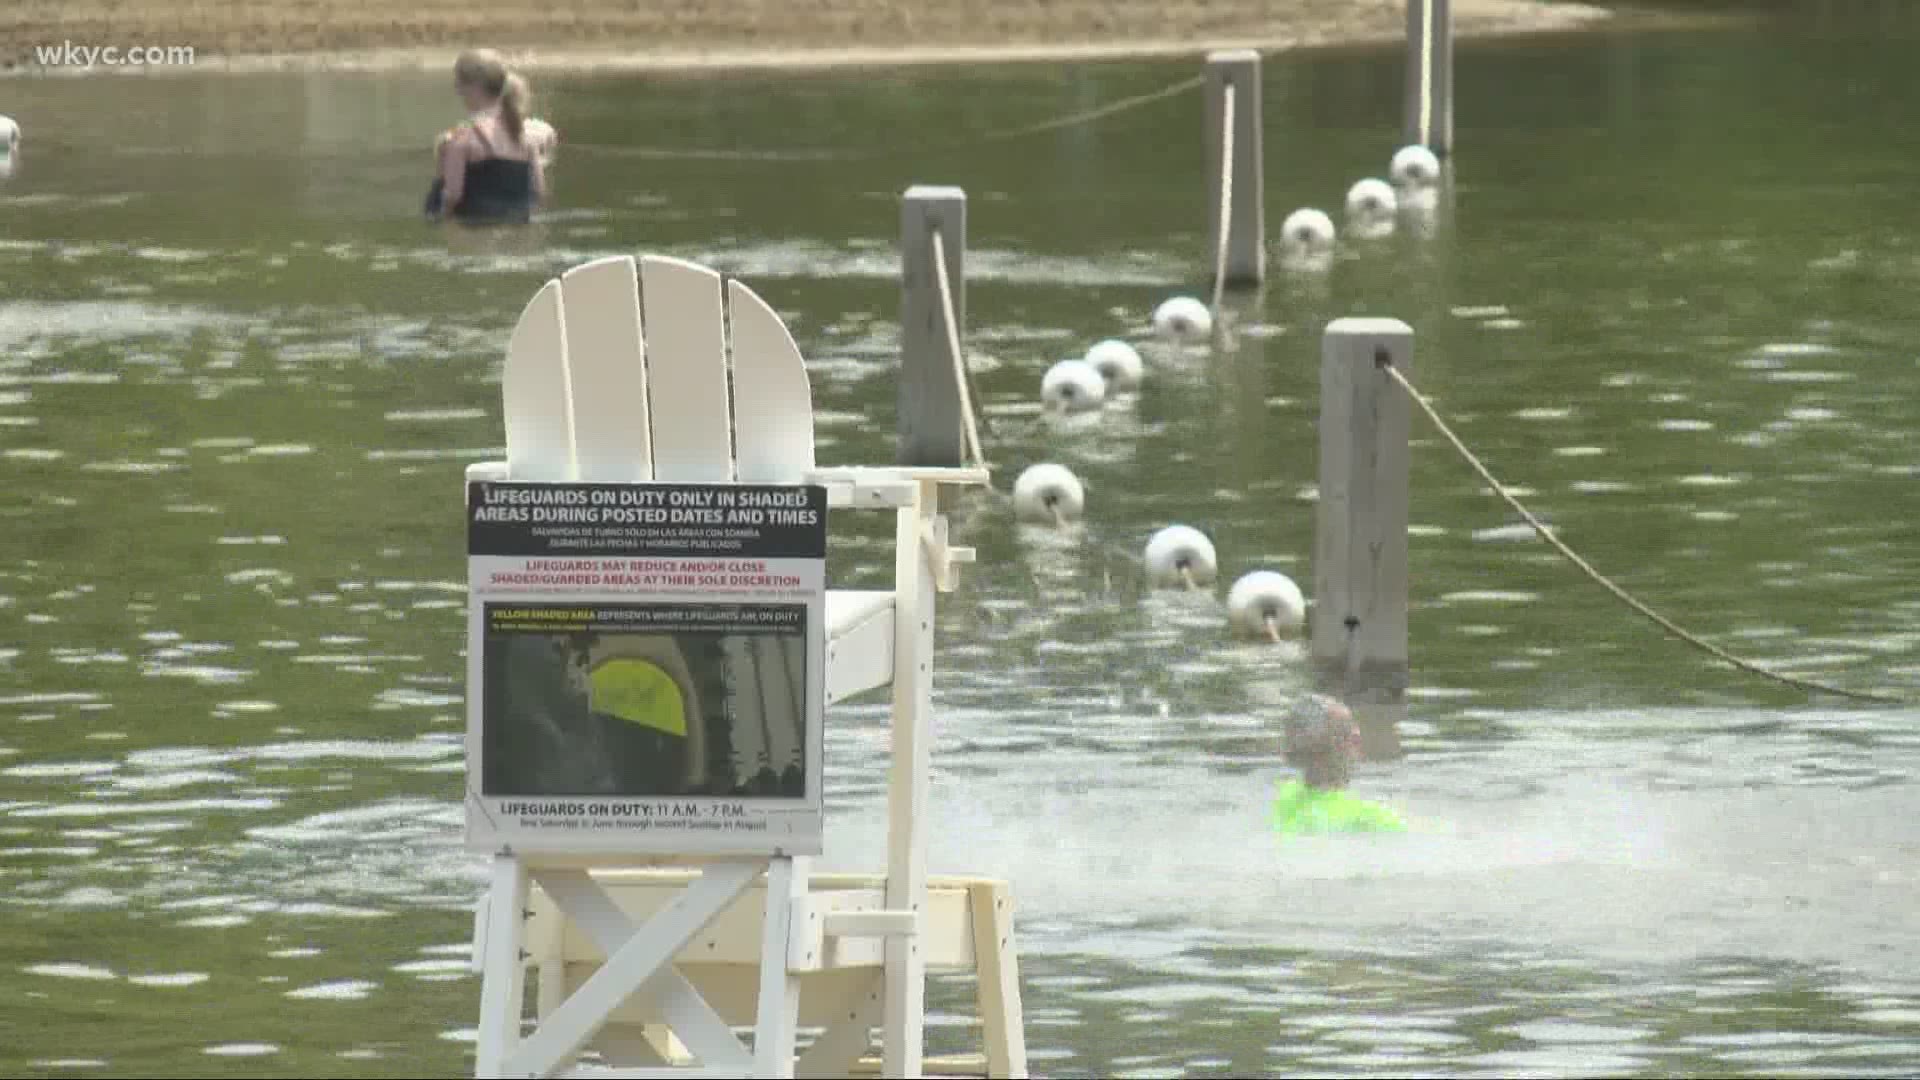 This case is bringing yet another warning to swimmers as we approach the holiday weekend. Brandon Simmons has more.